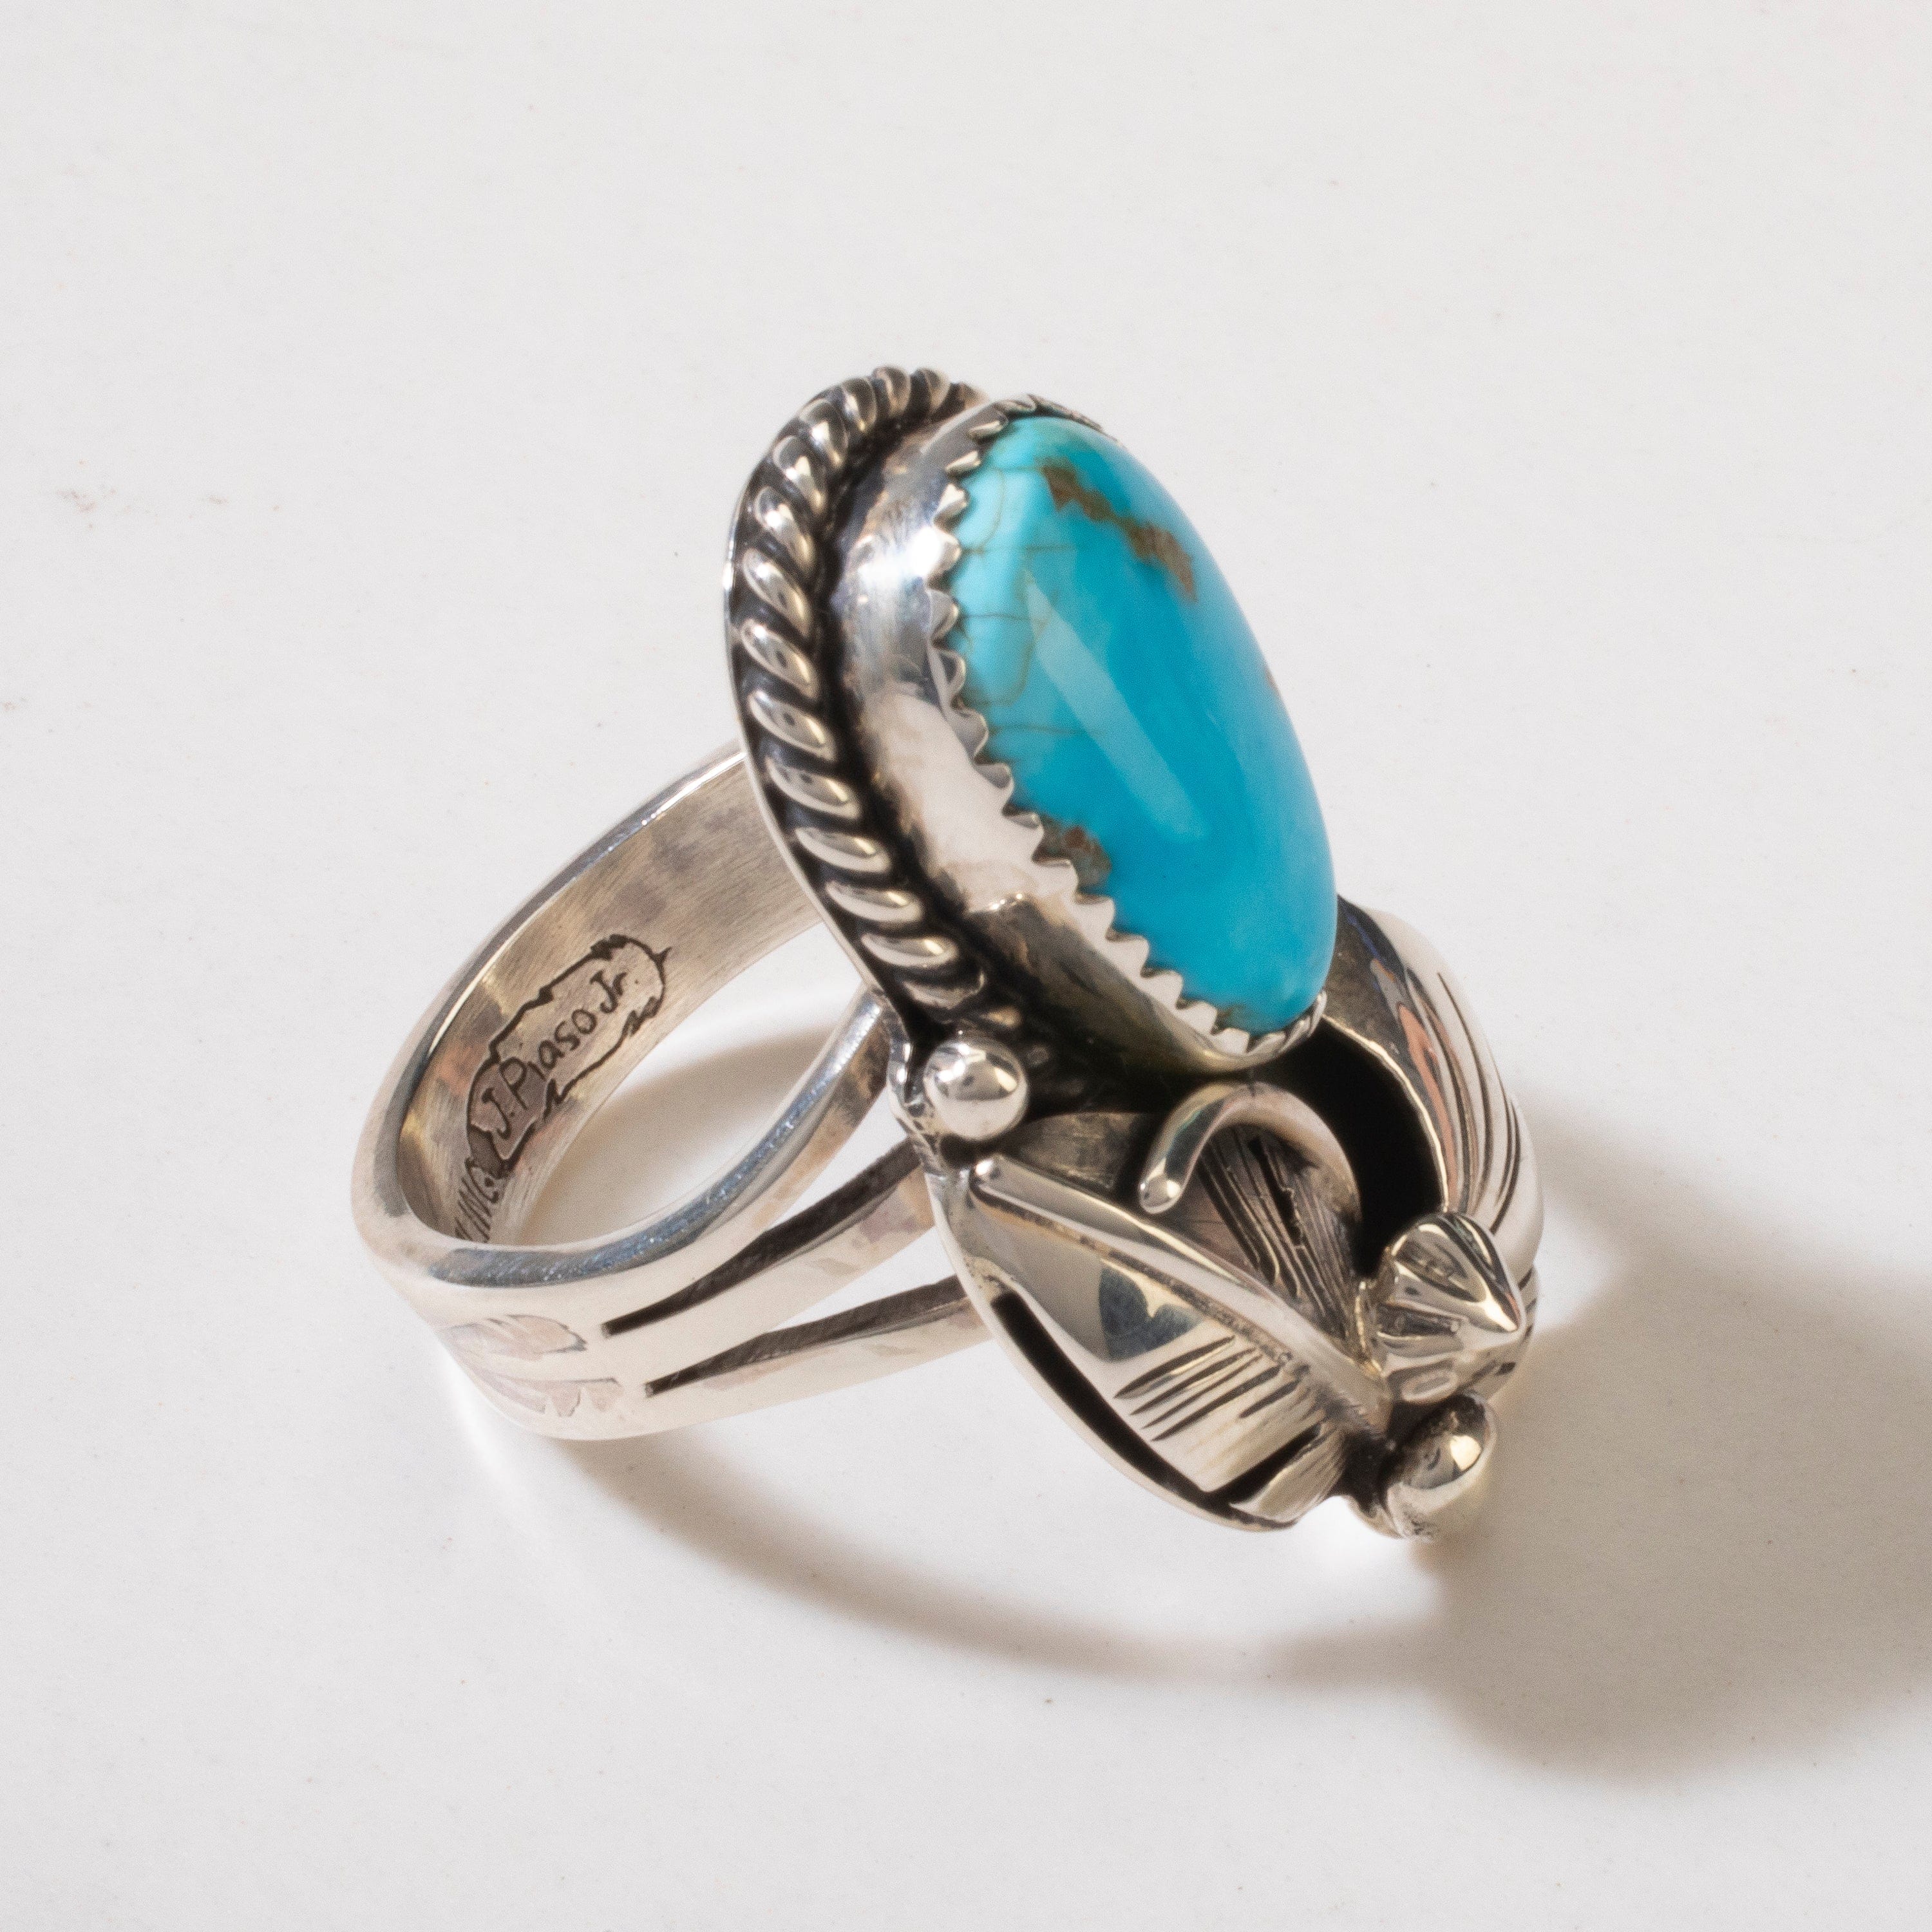 Kalifano Native American Jewelry 7 Joe Piaso Jr. Sleeping Beauty Turquoise Feather Navajo USA Native American Made 925 Sterling Silver Ring NAR600.056.7